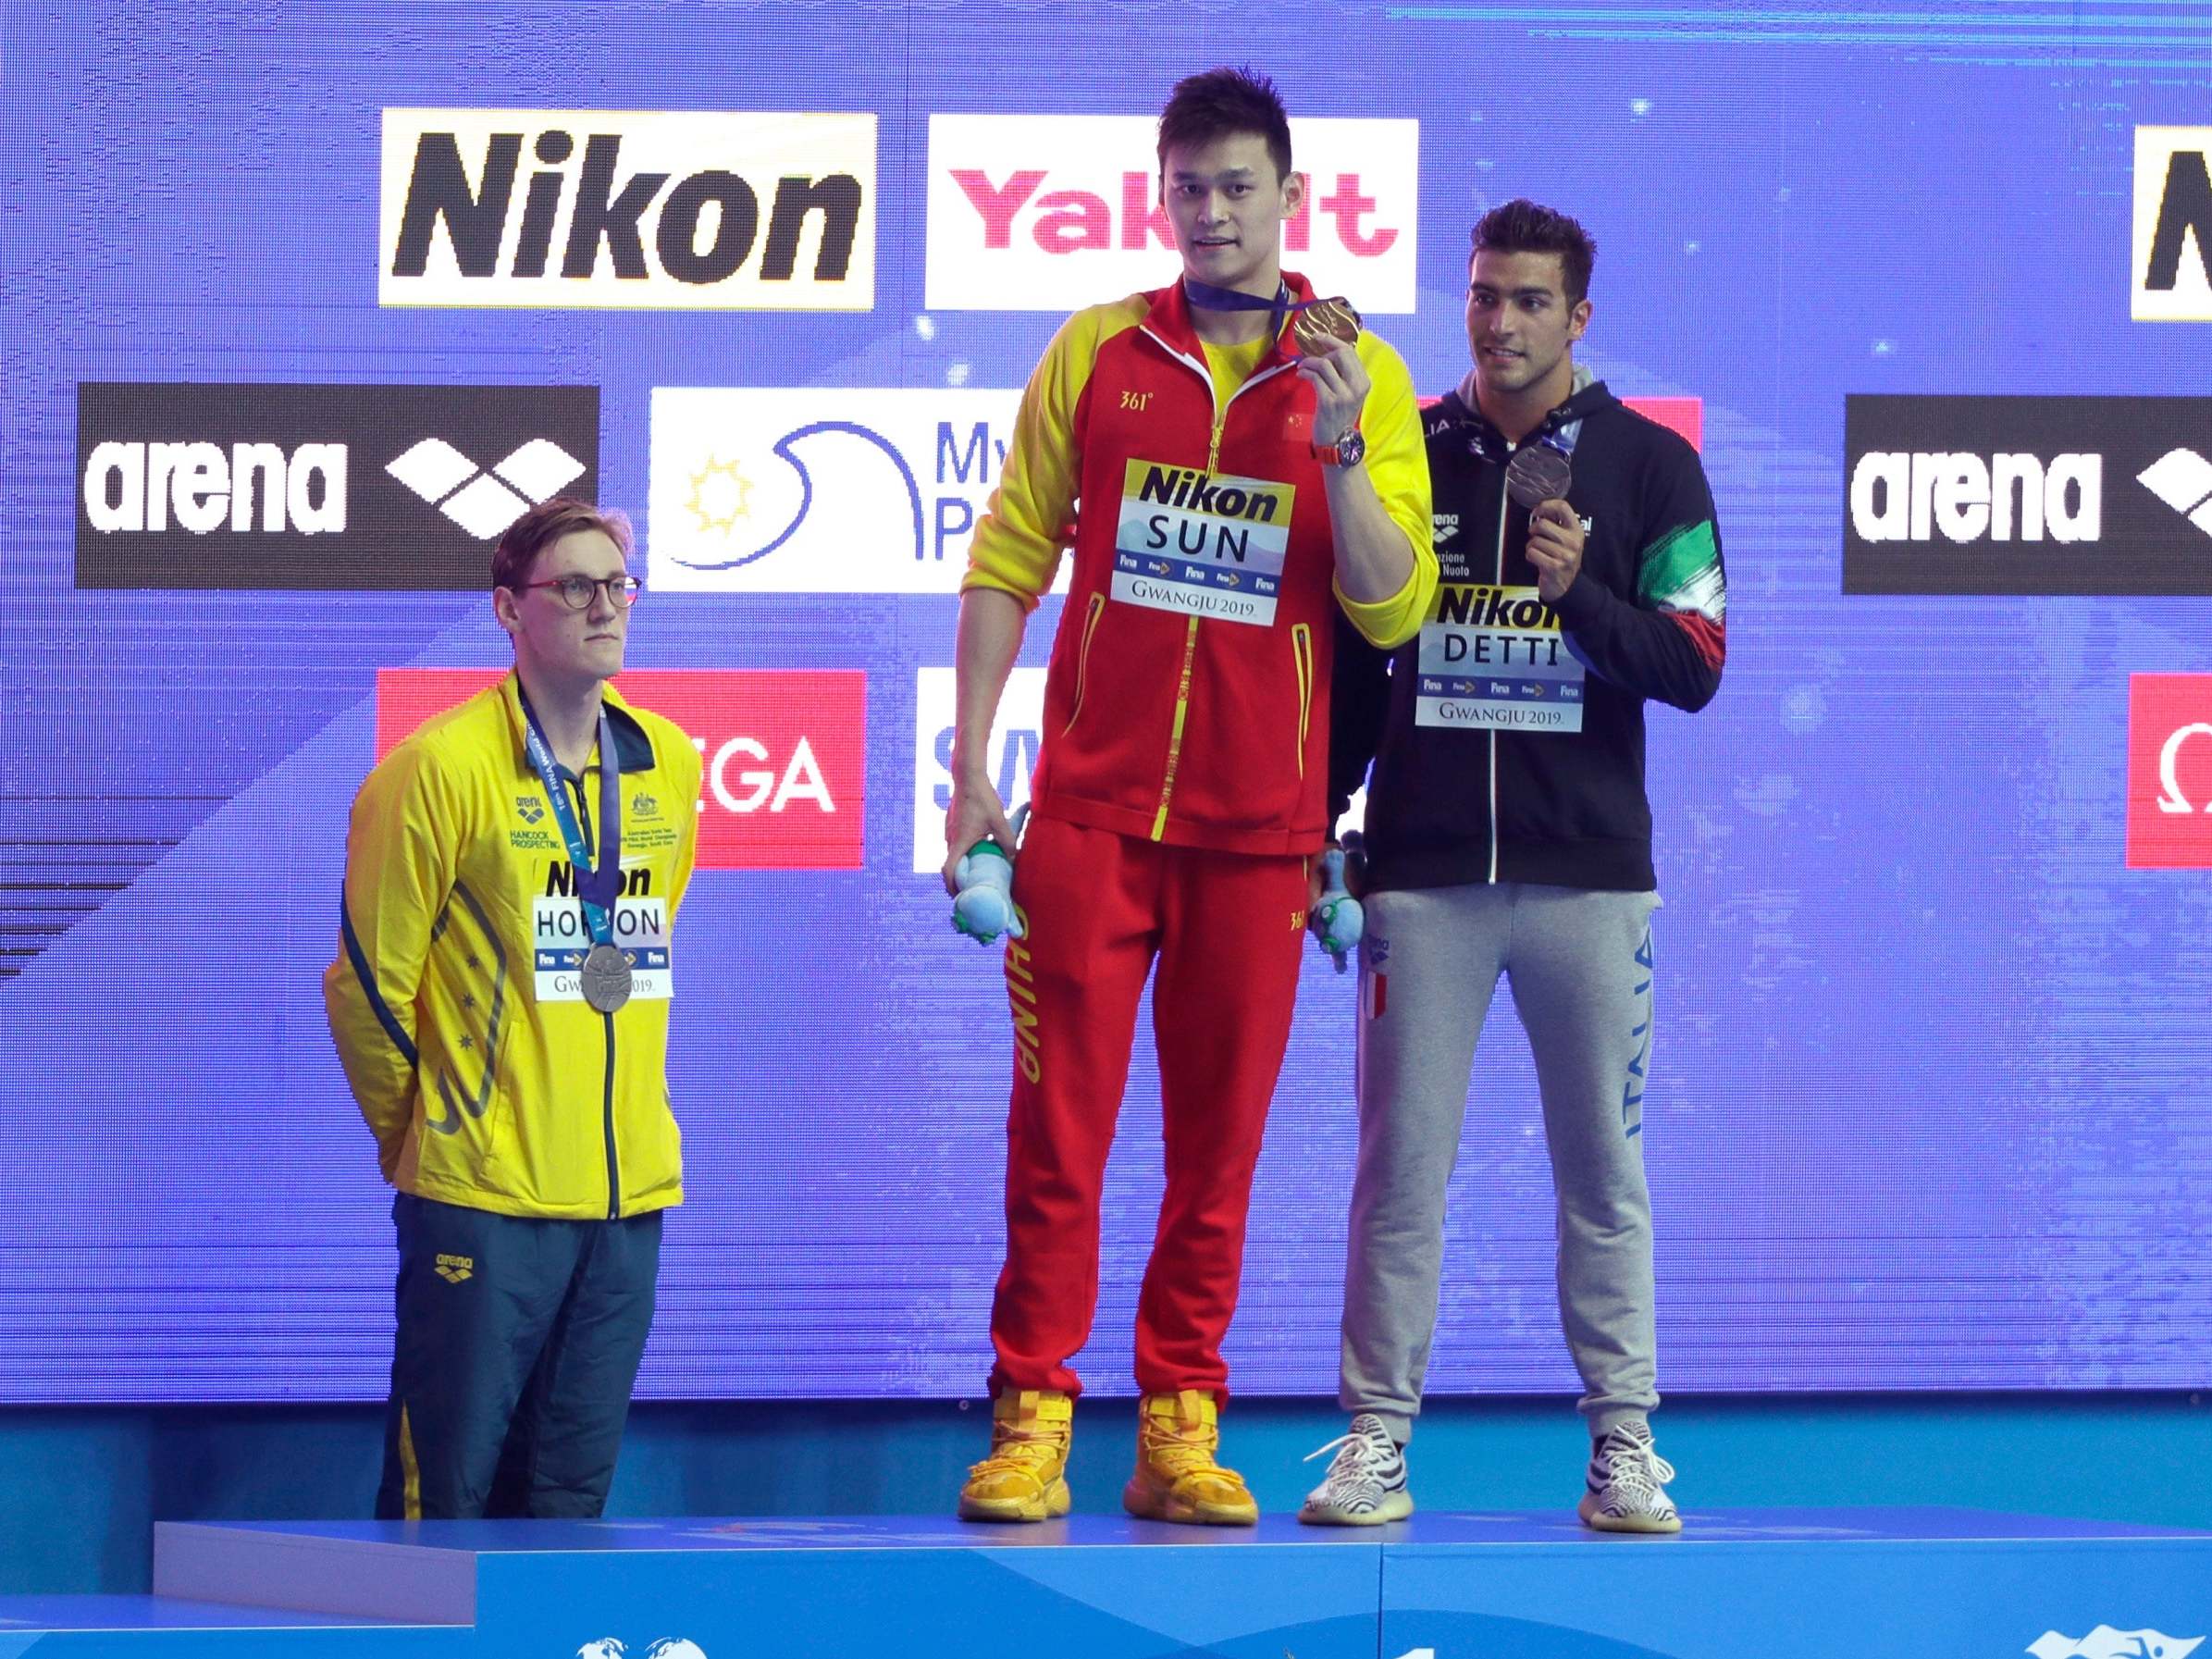 Mack Horton refused to step on the podium in protest against winner Sun Yang